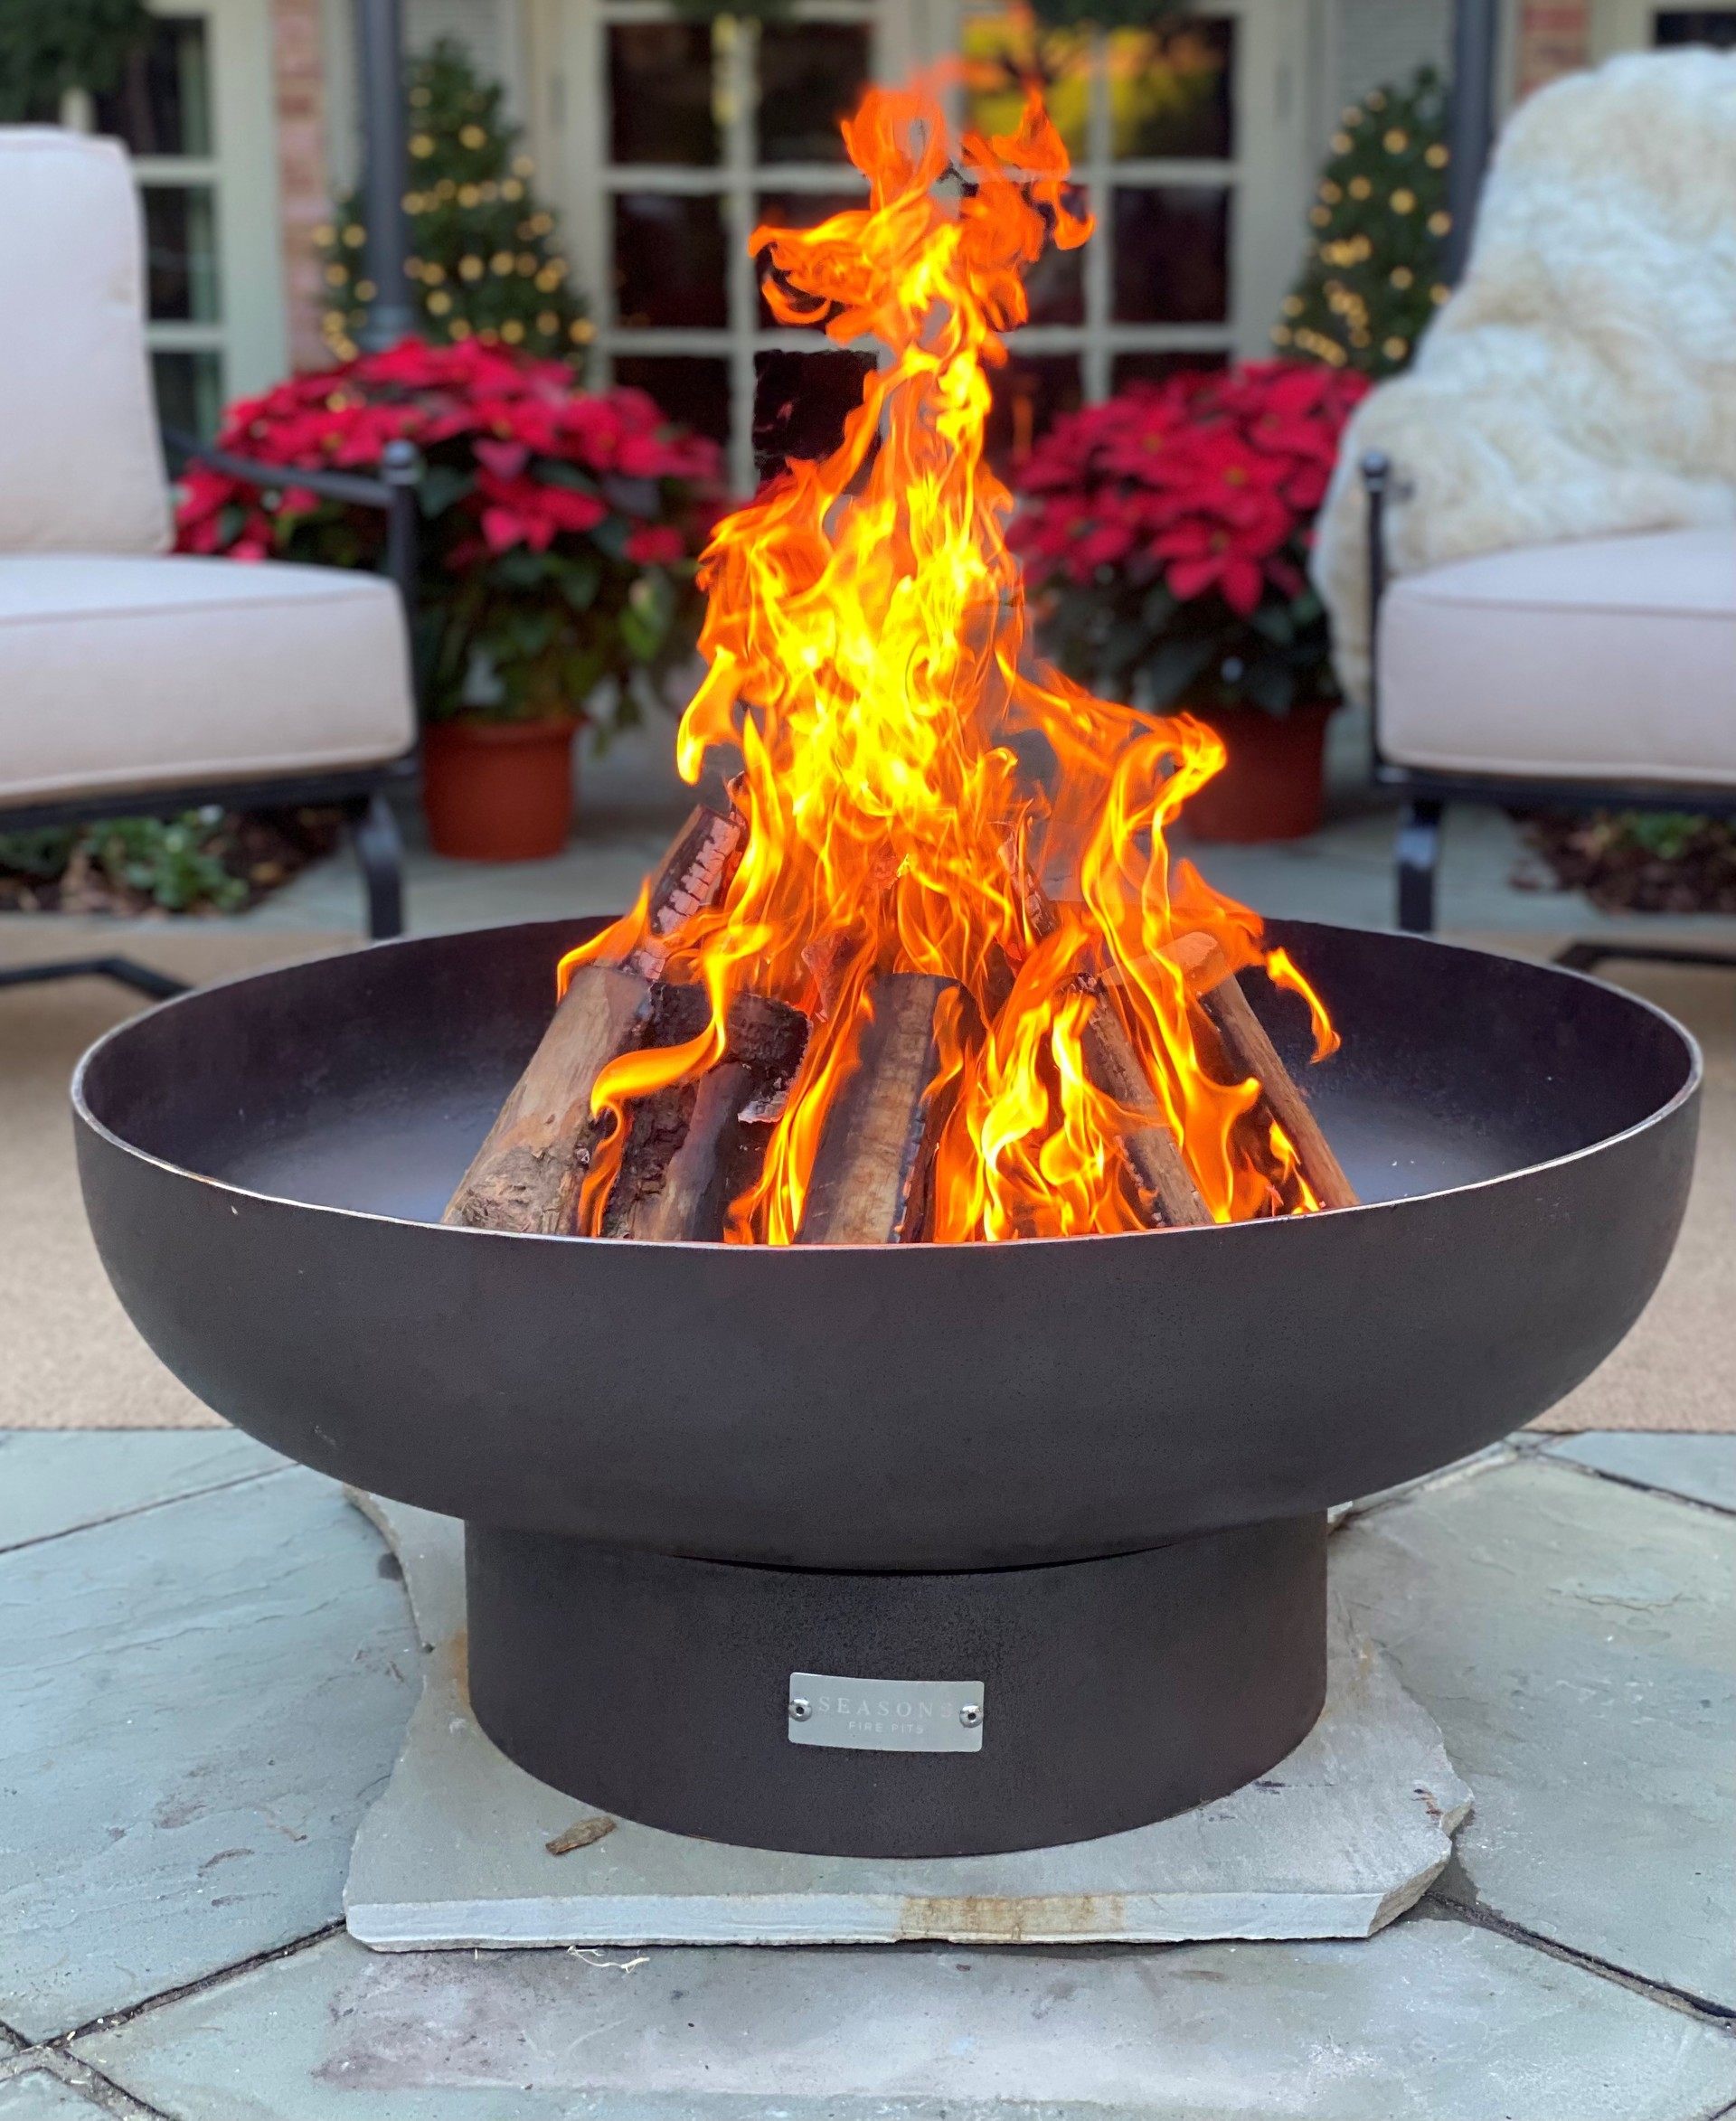 The Benefits of a Gas-Burning Fire Pit